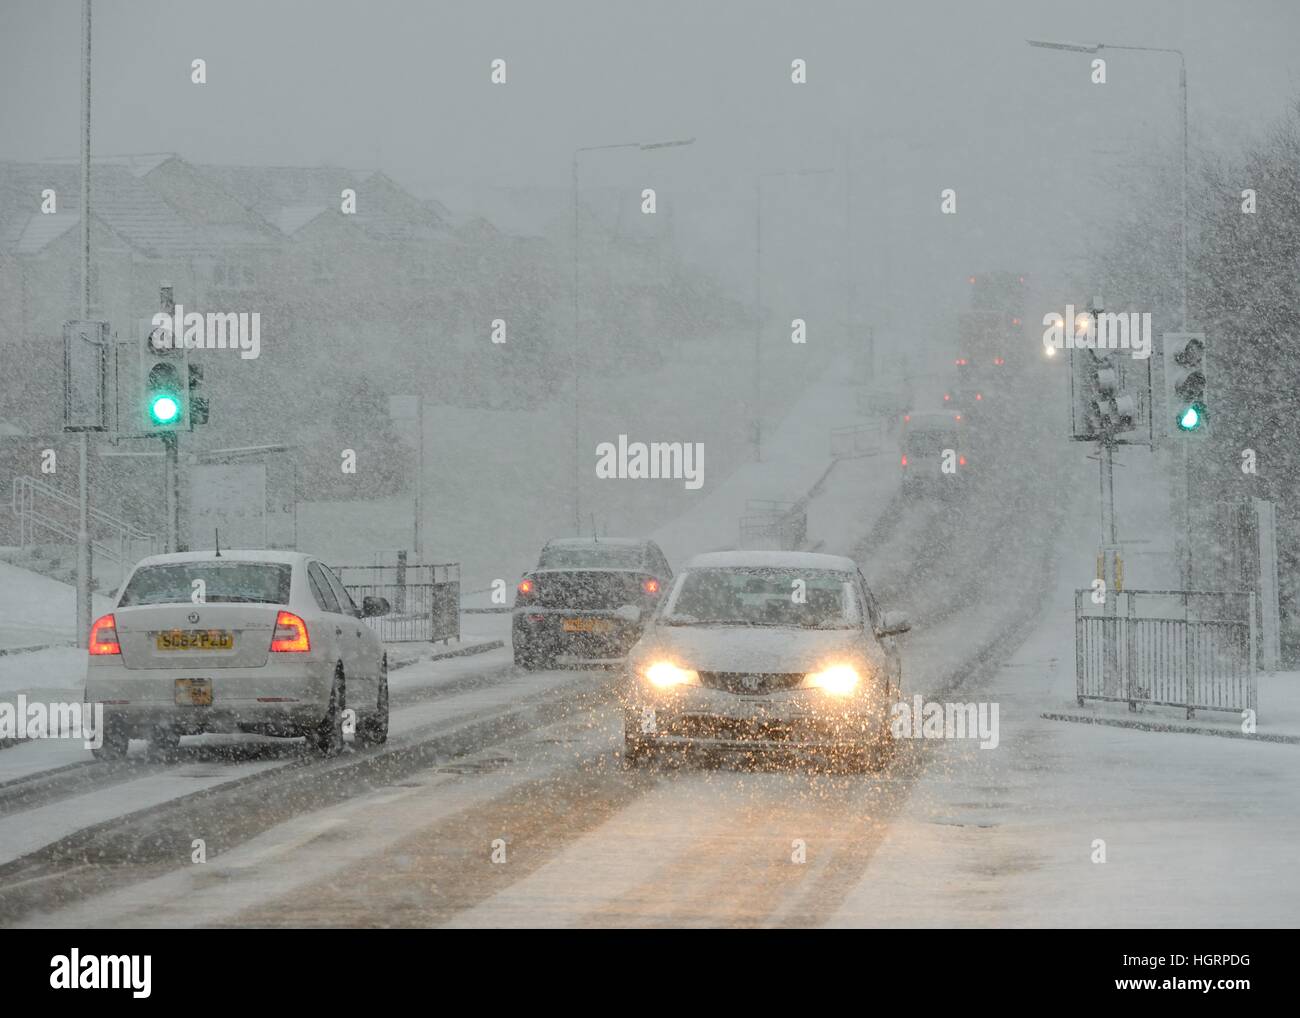 Parkhouse Road, Glasgow, Scotland, UK. 12th, January, 2017. Winter weather. As forecast, snow arrived in Scotland today making driving conditions hazardous on the roads because of reduced visibility. Stock Photo